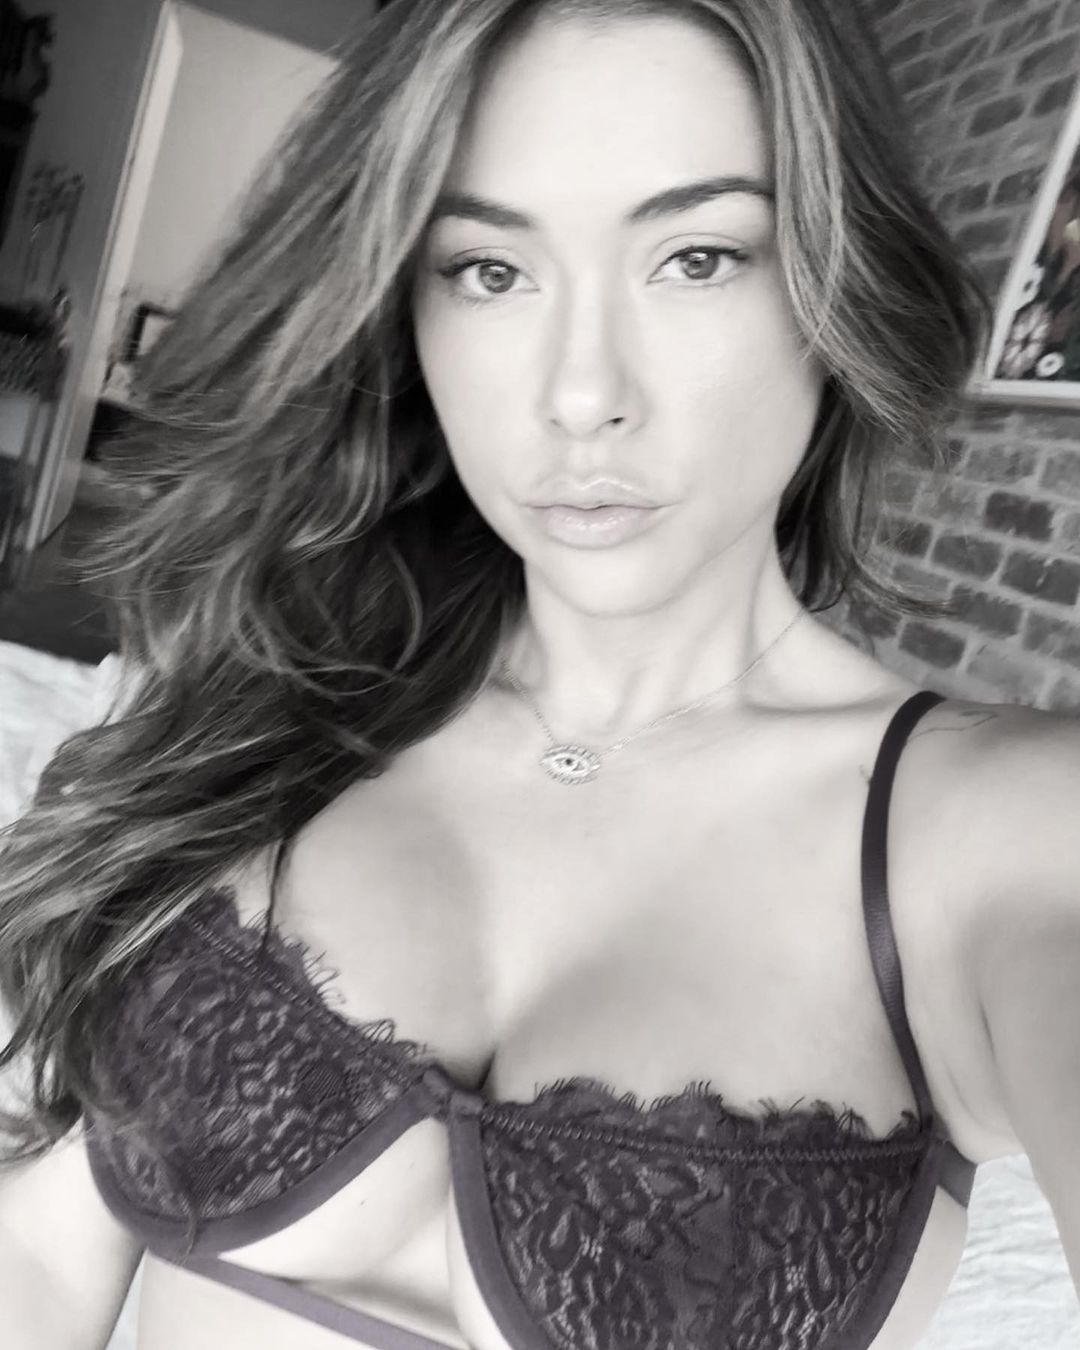 Arianny Celeste Looses Followers After Trump Post! - Photo 5